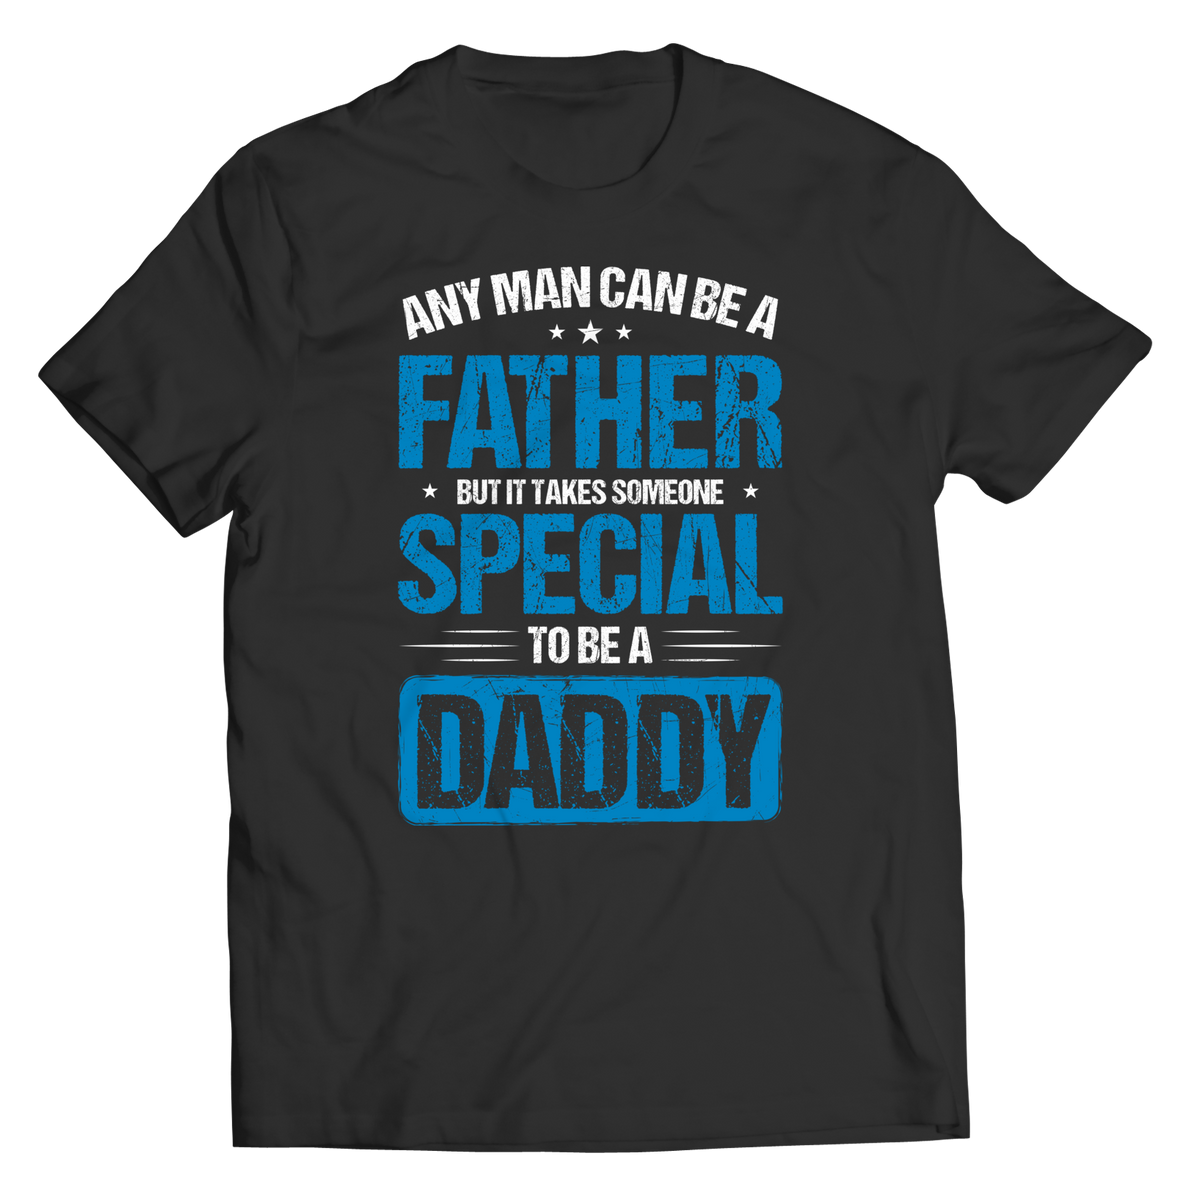 Any Man Can Be A Father, But It Takes Someone Special To Be A Daddy